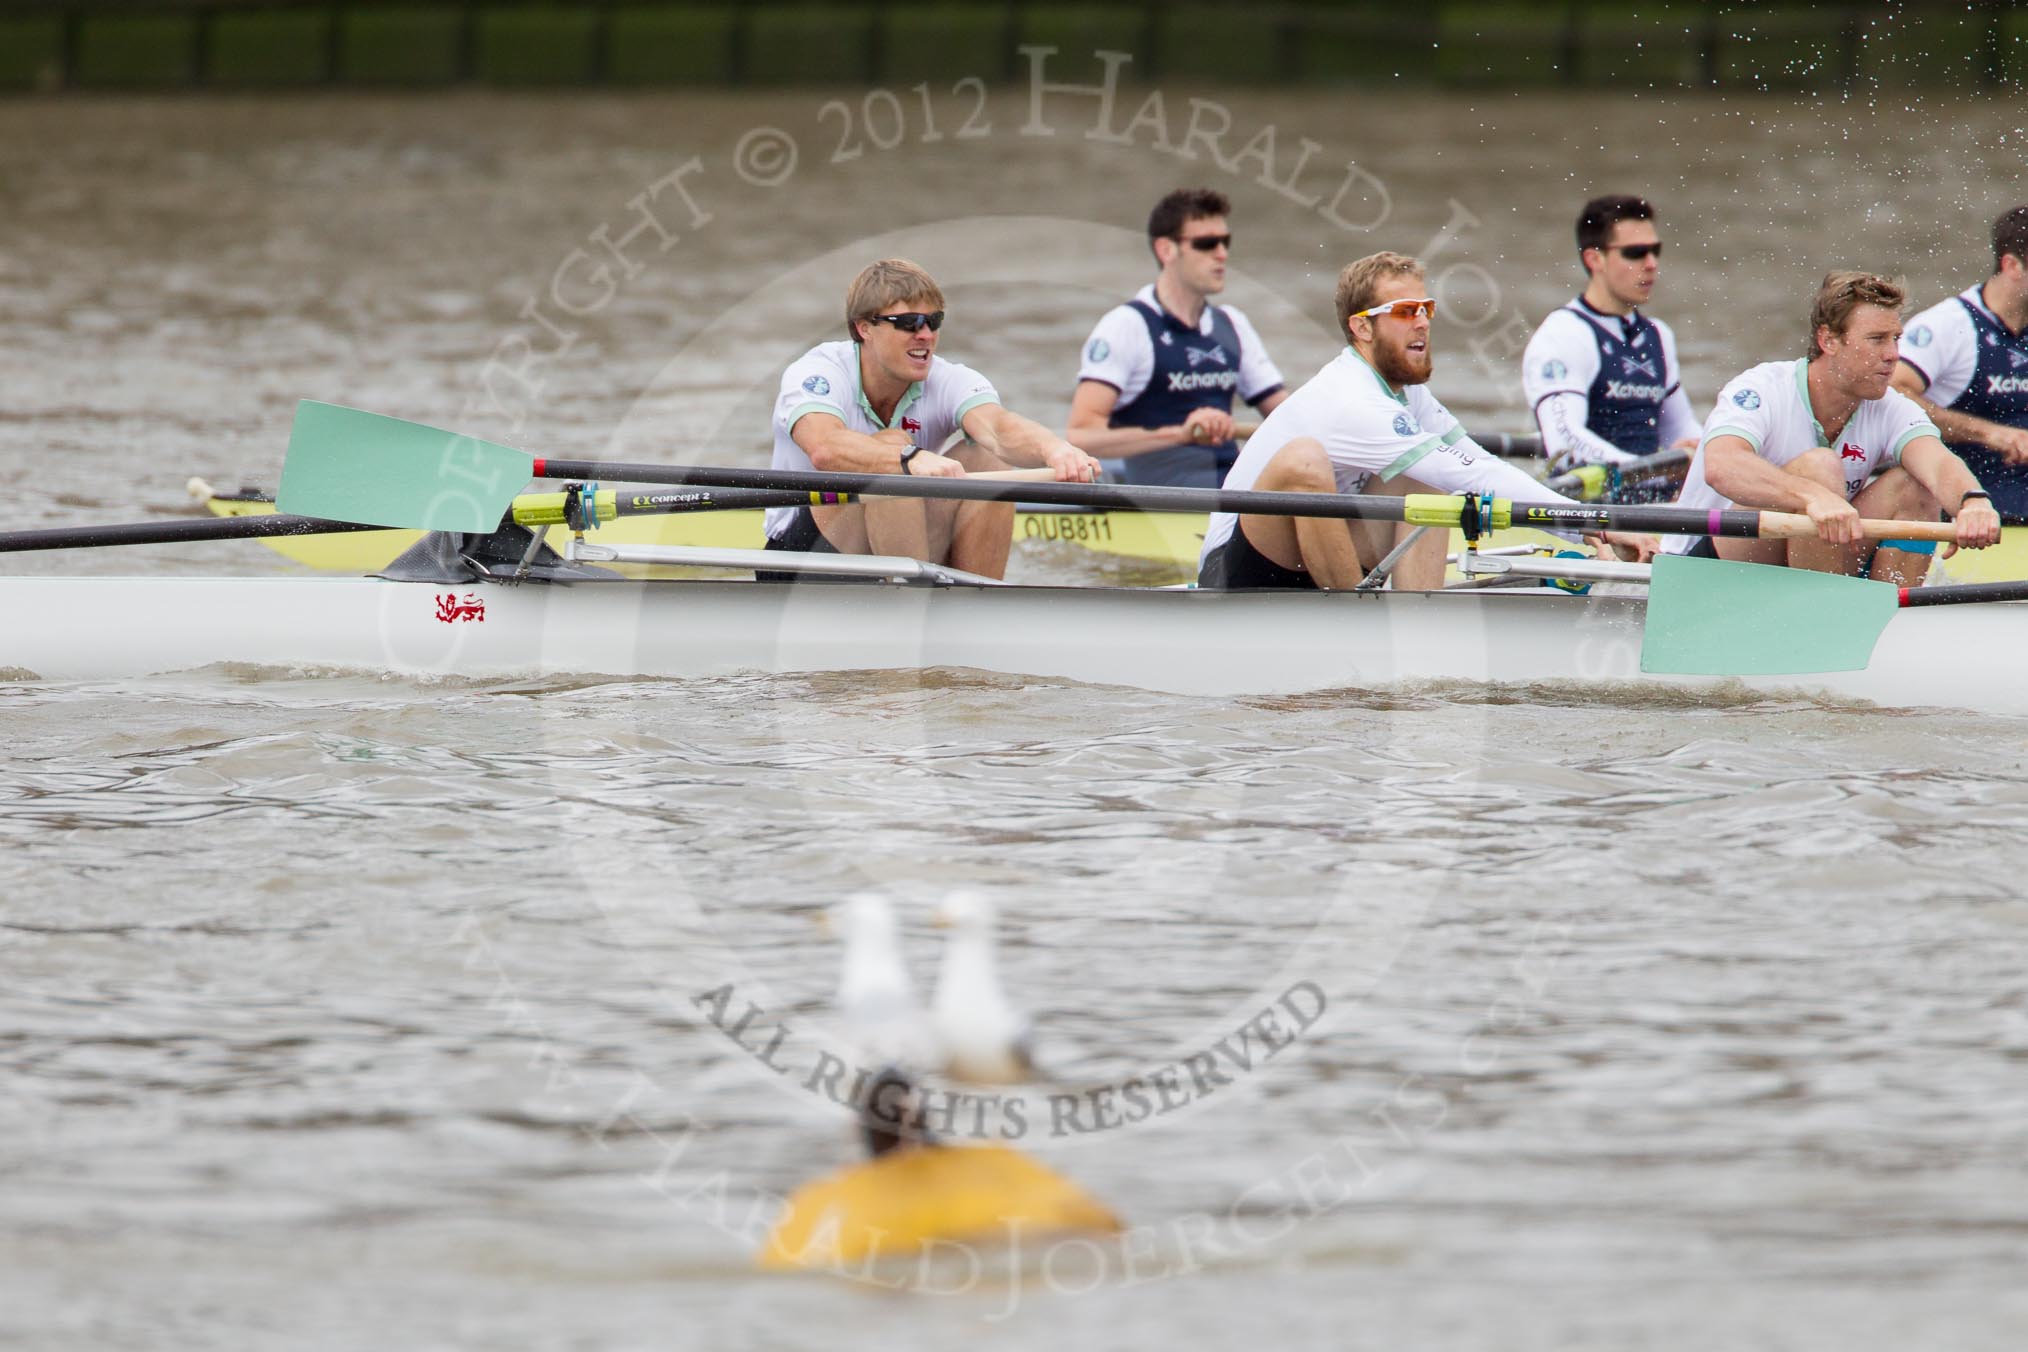 The Boat Race 2012: The 2012 Boat Race, shortly after the start: In the foreground the Cambridge Blue Boat, with David Nelson, Moritz Schramm, Jack Lindeman, in the Oxford boat Dr. Alexander Woods, William Zeng, and Kevin Baum..




on 07 April 2012 at 14:16, image #258